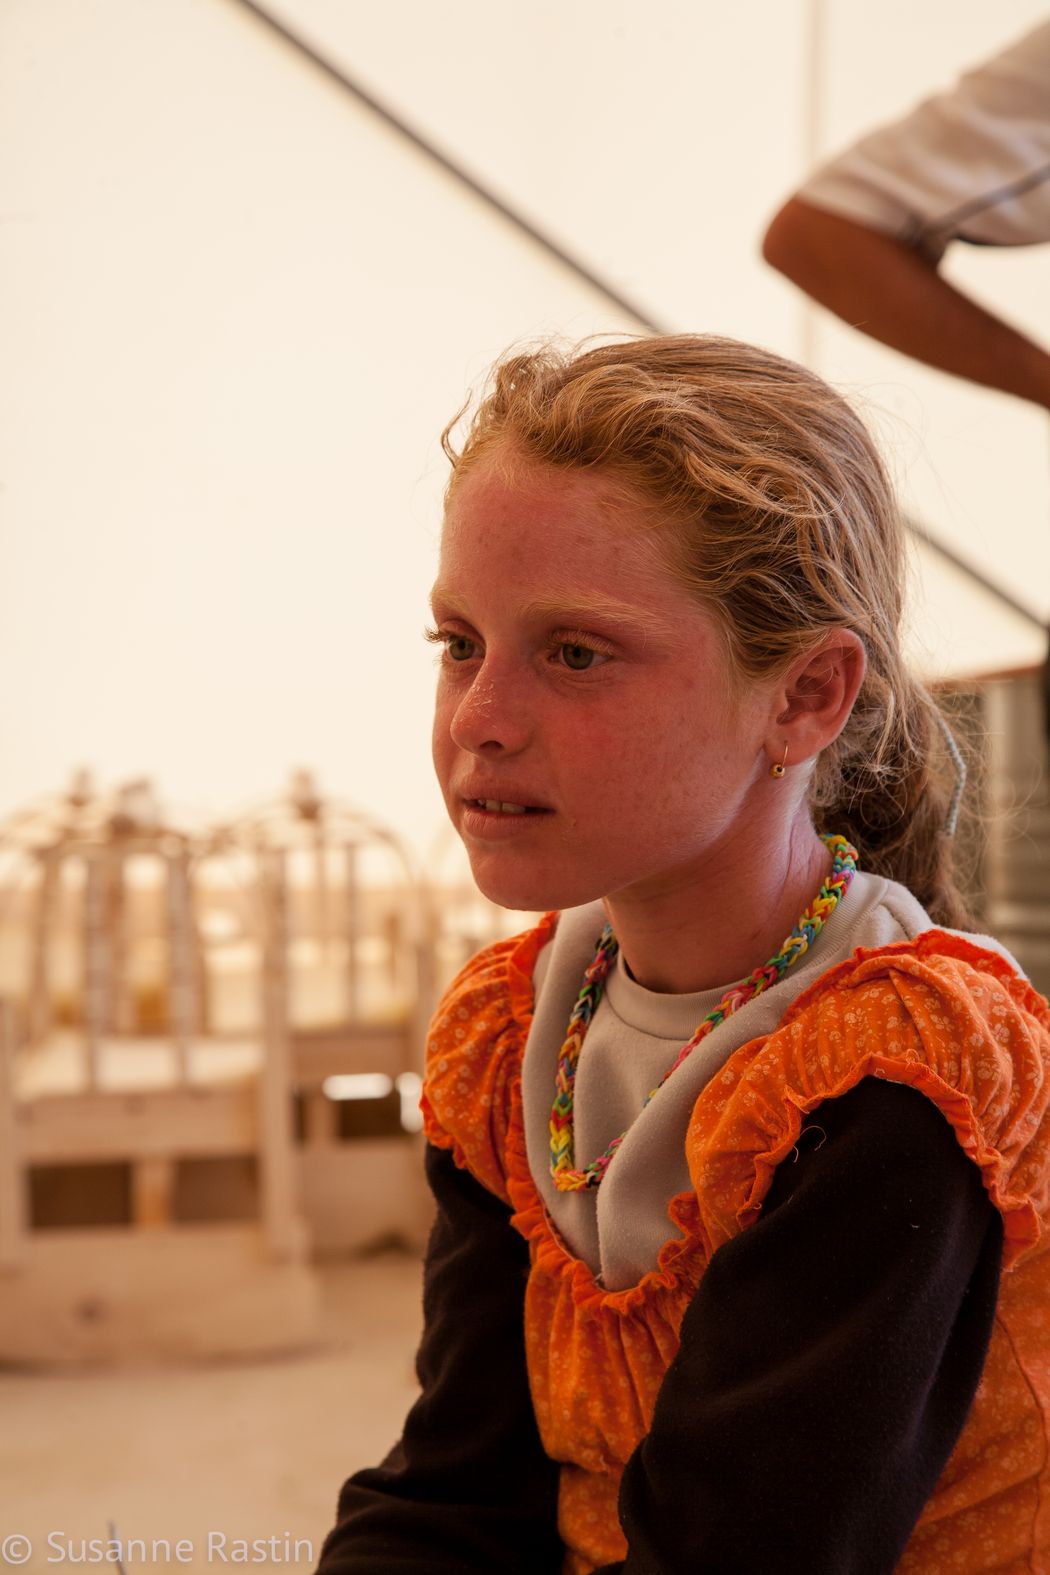 Ten-year-old Zina has lived with her family in the Bersevi II refugee camp for seven months. 